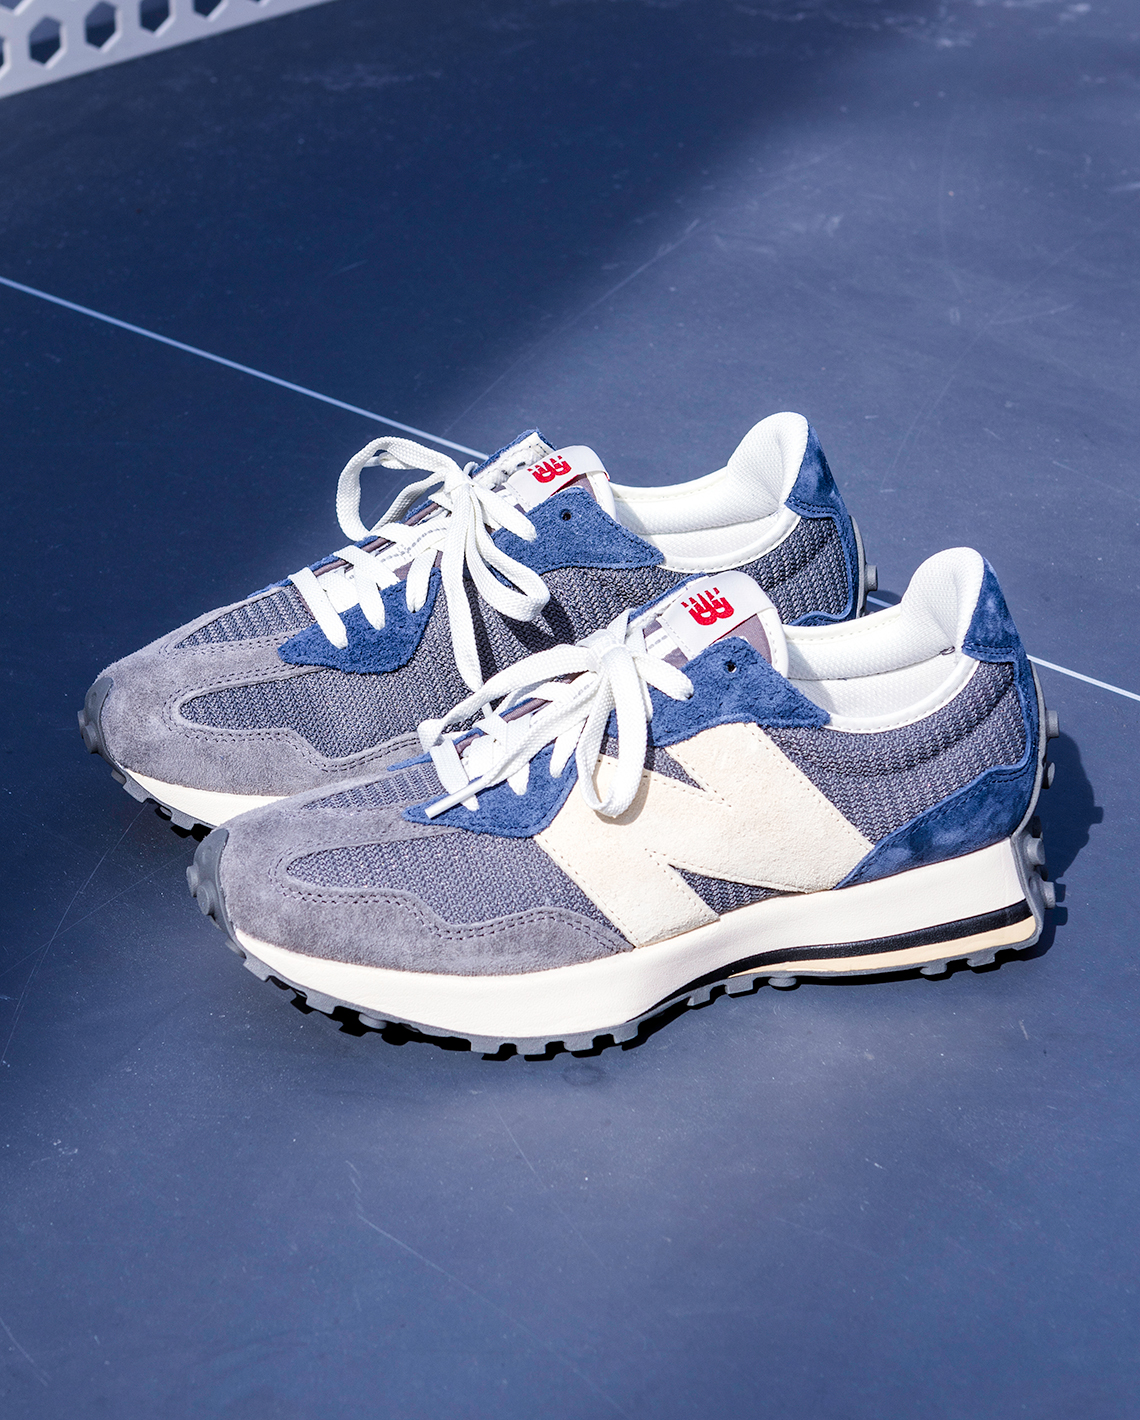 New Balance Shopping Guide March 2022 327 Gallery 1